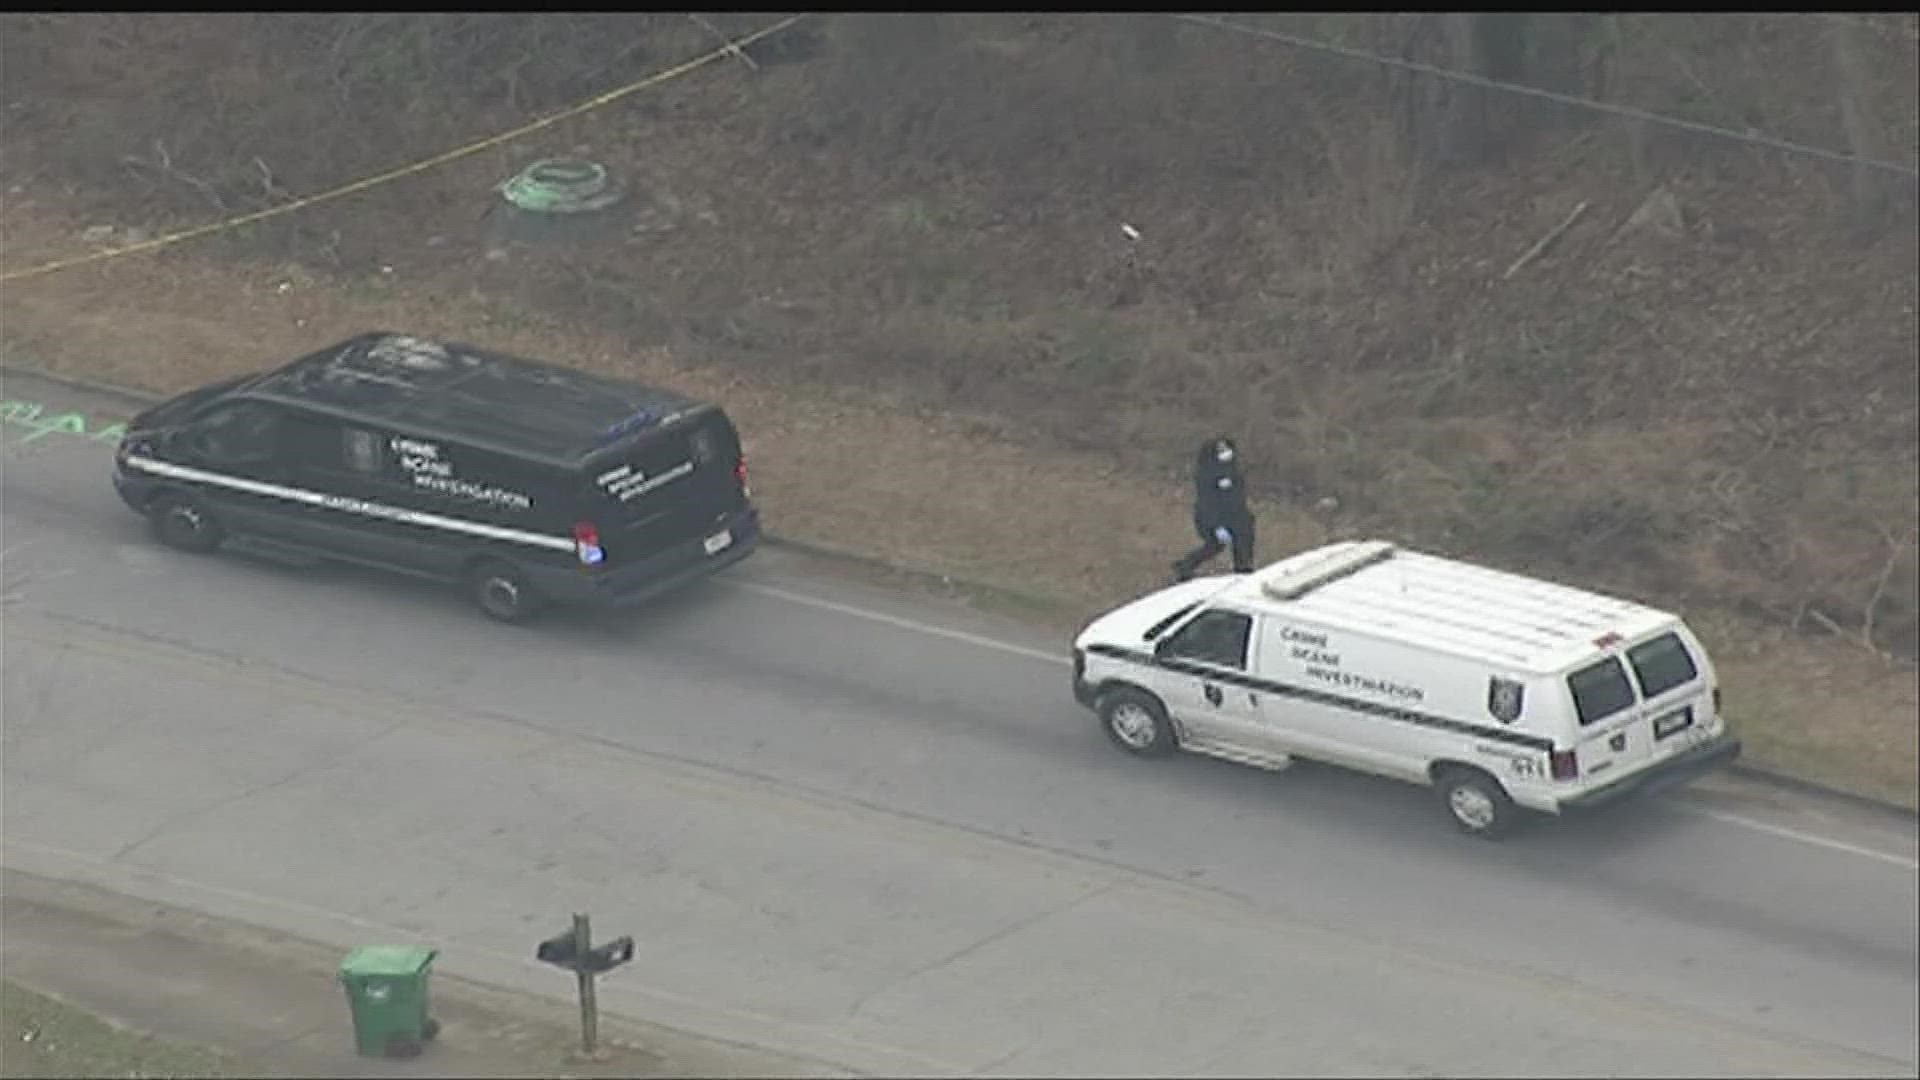 A body was discovered near Lithonia Industrial Boulevard on Marbut Road in Lithonia on Monday.